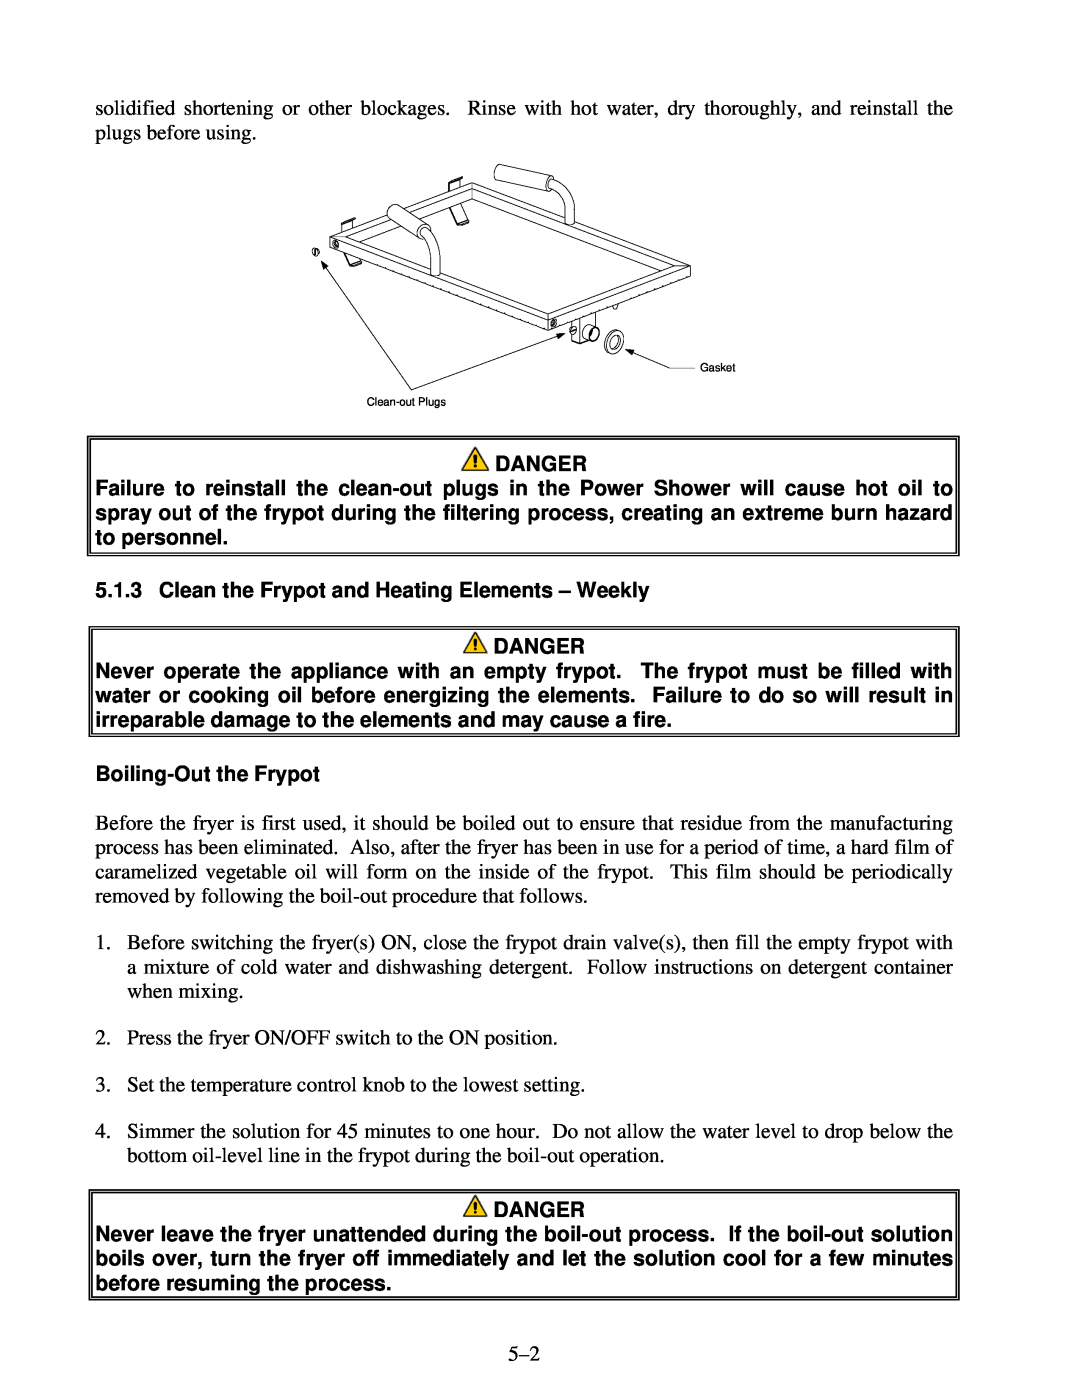 Frymaster H17SC, H22SC, H14SC manual Clean the Frypot and Heating Elements - Weekly DANGER, Boiling-Out the Frypot, Danger 